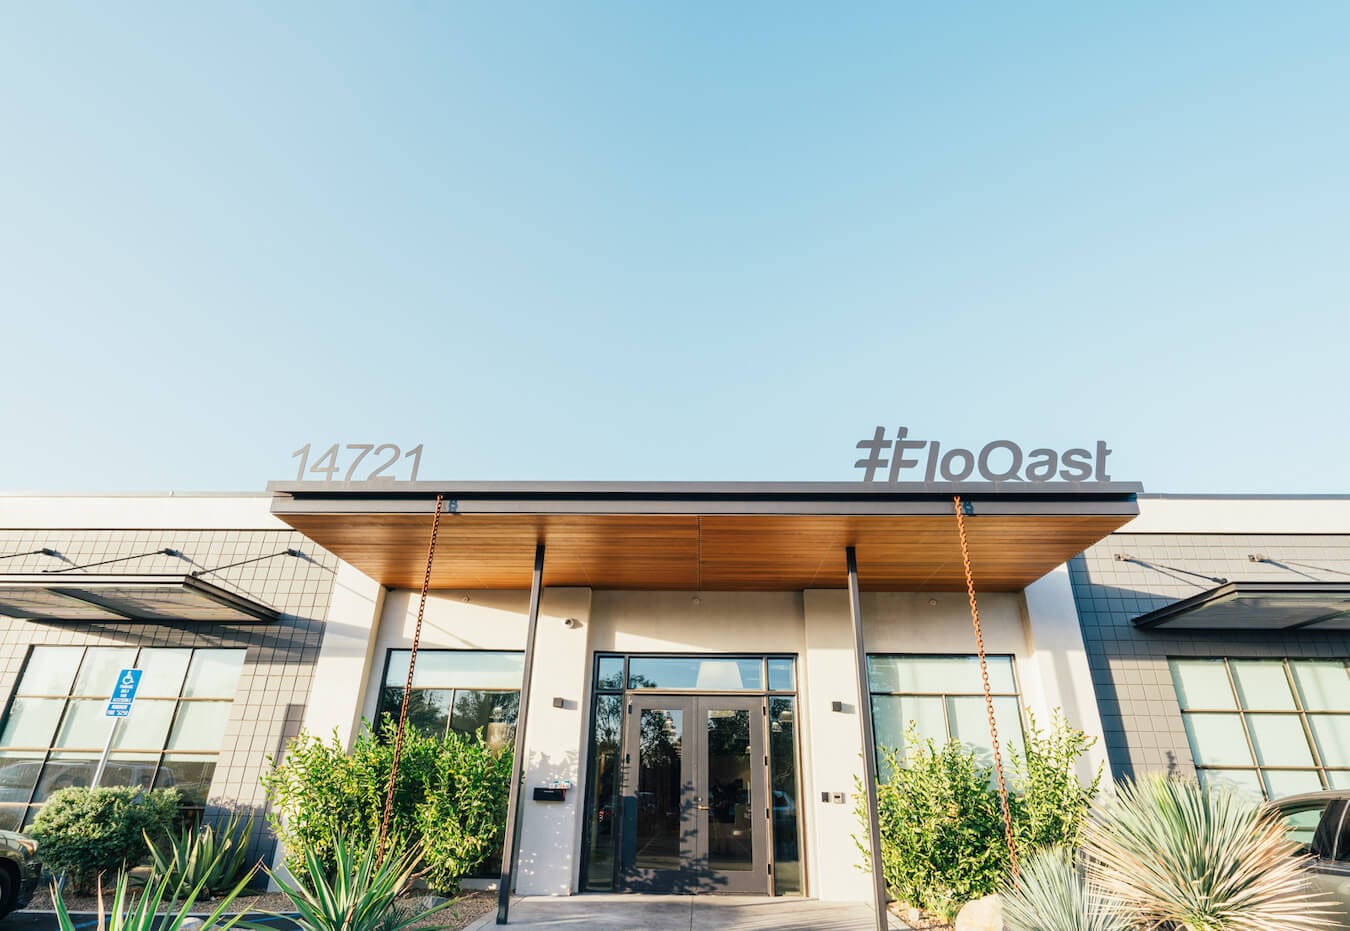 Why FloQast is one of the best places to work in Los Angeles